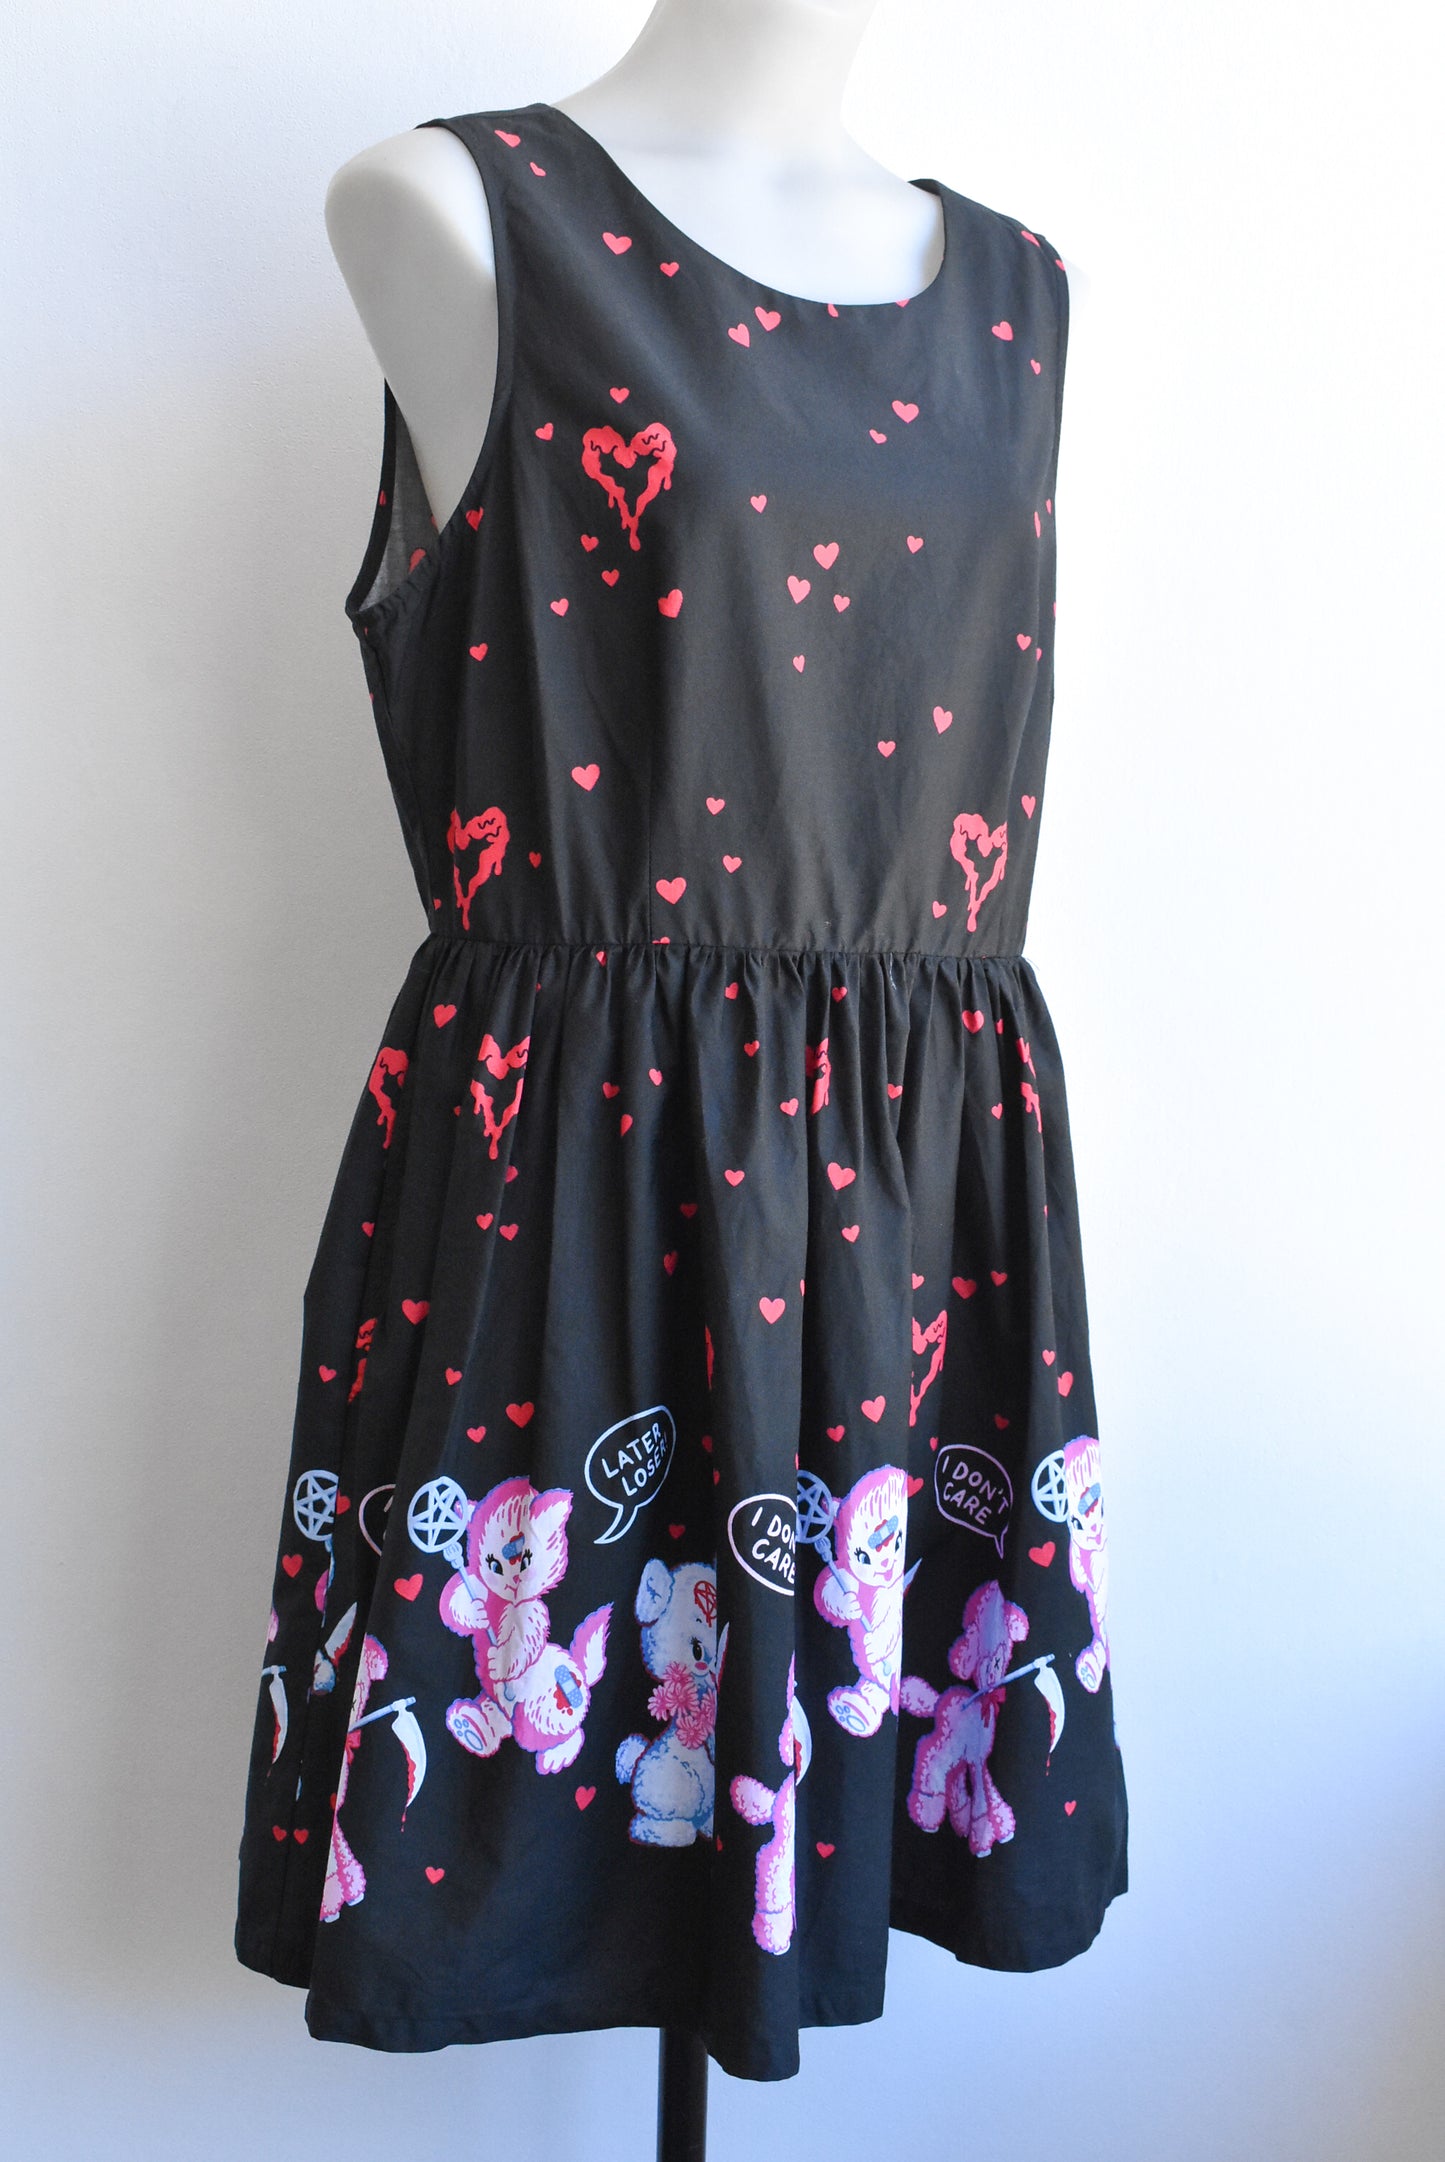 Black Friday cynical lamb/kitten dress with pockets, size 14